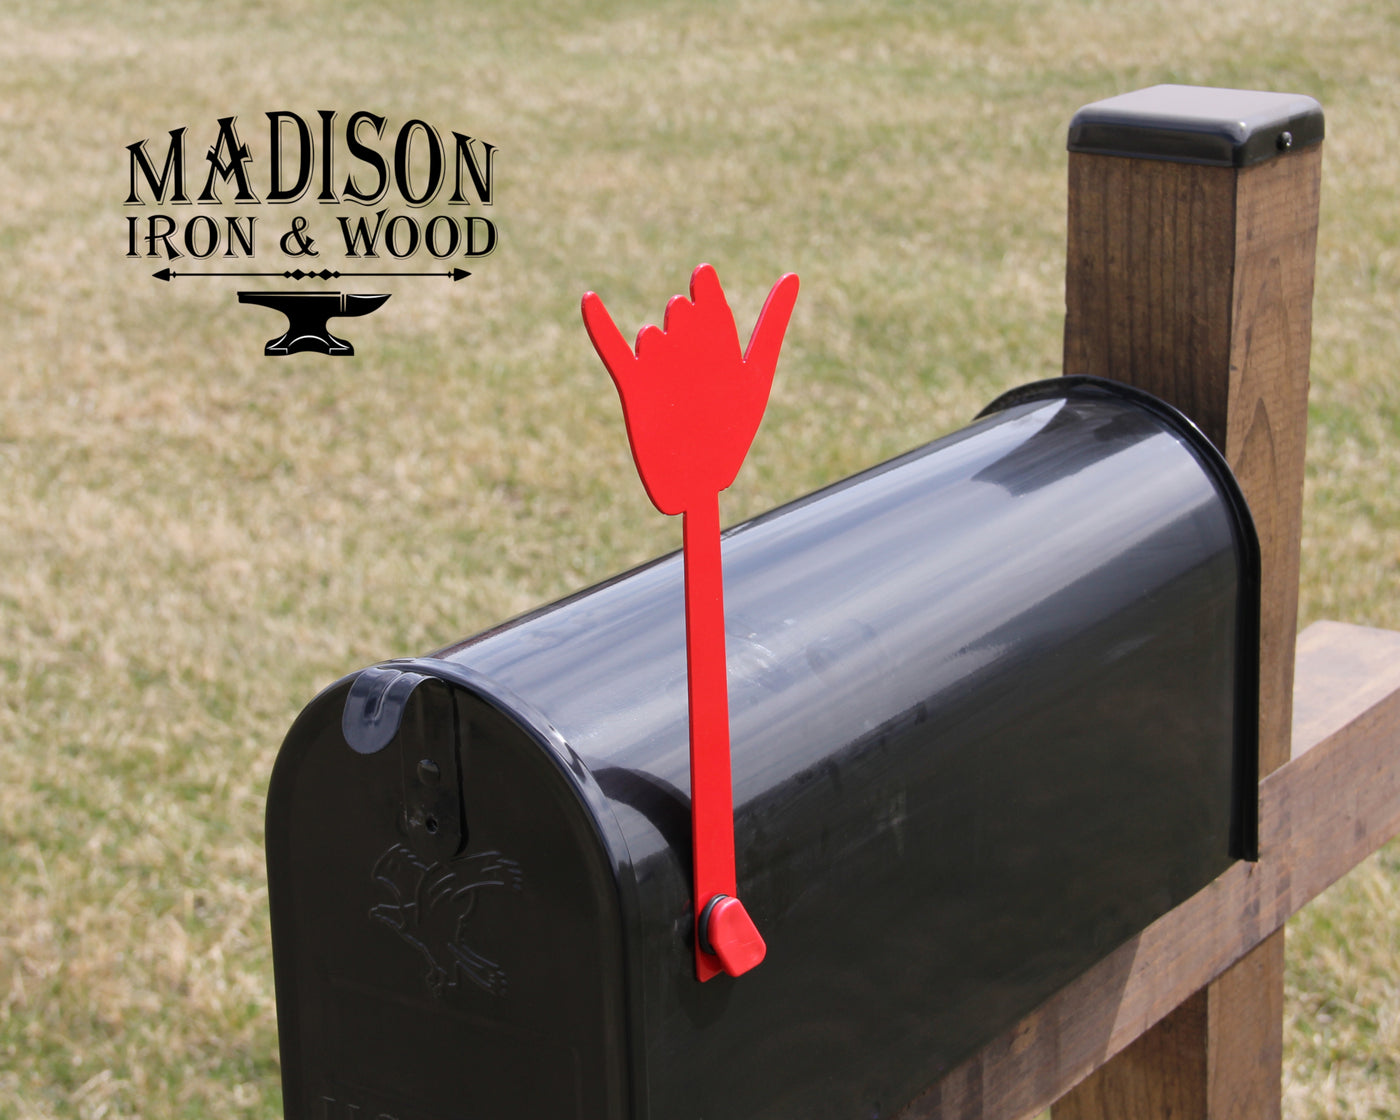 Hang Loose Hand Gesture Mailbox Flag - Madison Iron and Wood - Mailbox Post Decor - metal outdoor decor - Steel deocrations - american made products - veteran owned business products - fencing decorations - fencing supplies - custom wall decorations - personalized wall signs - steel - decorative post caps - steel post caps - metal post caps - brackets - structural brackets - home improvement - easter - easter decorations - easter gift - easter yard decor